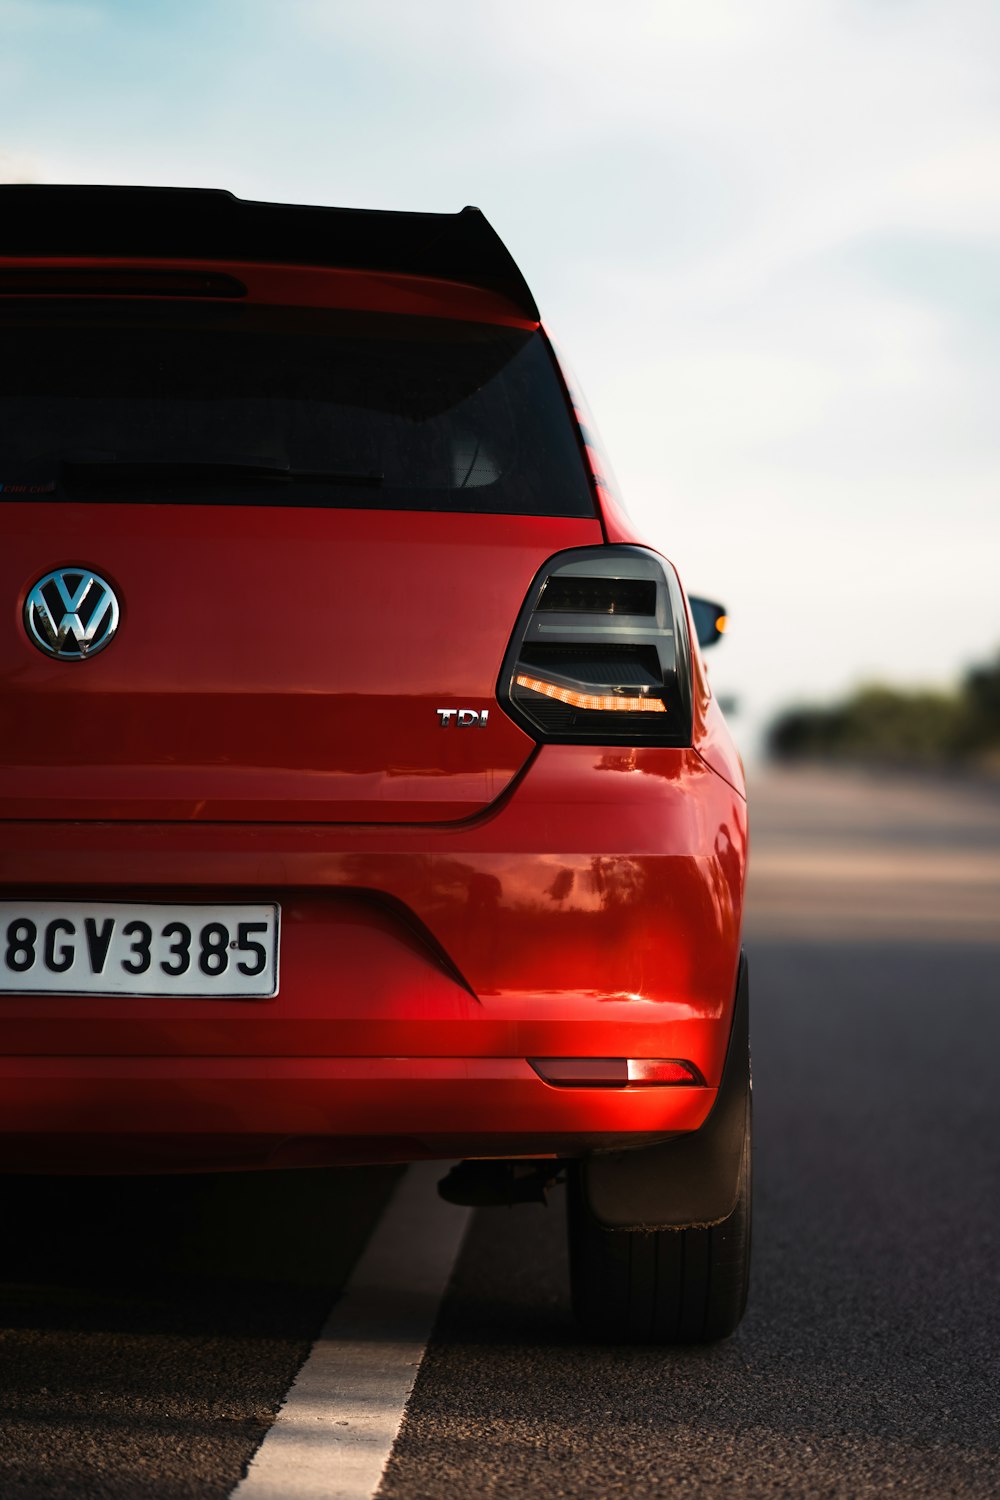 The back of a red car photo – Free Volkswagen polo Image on Unsplash